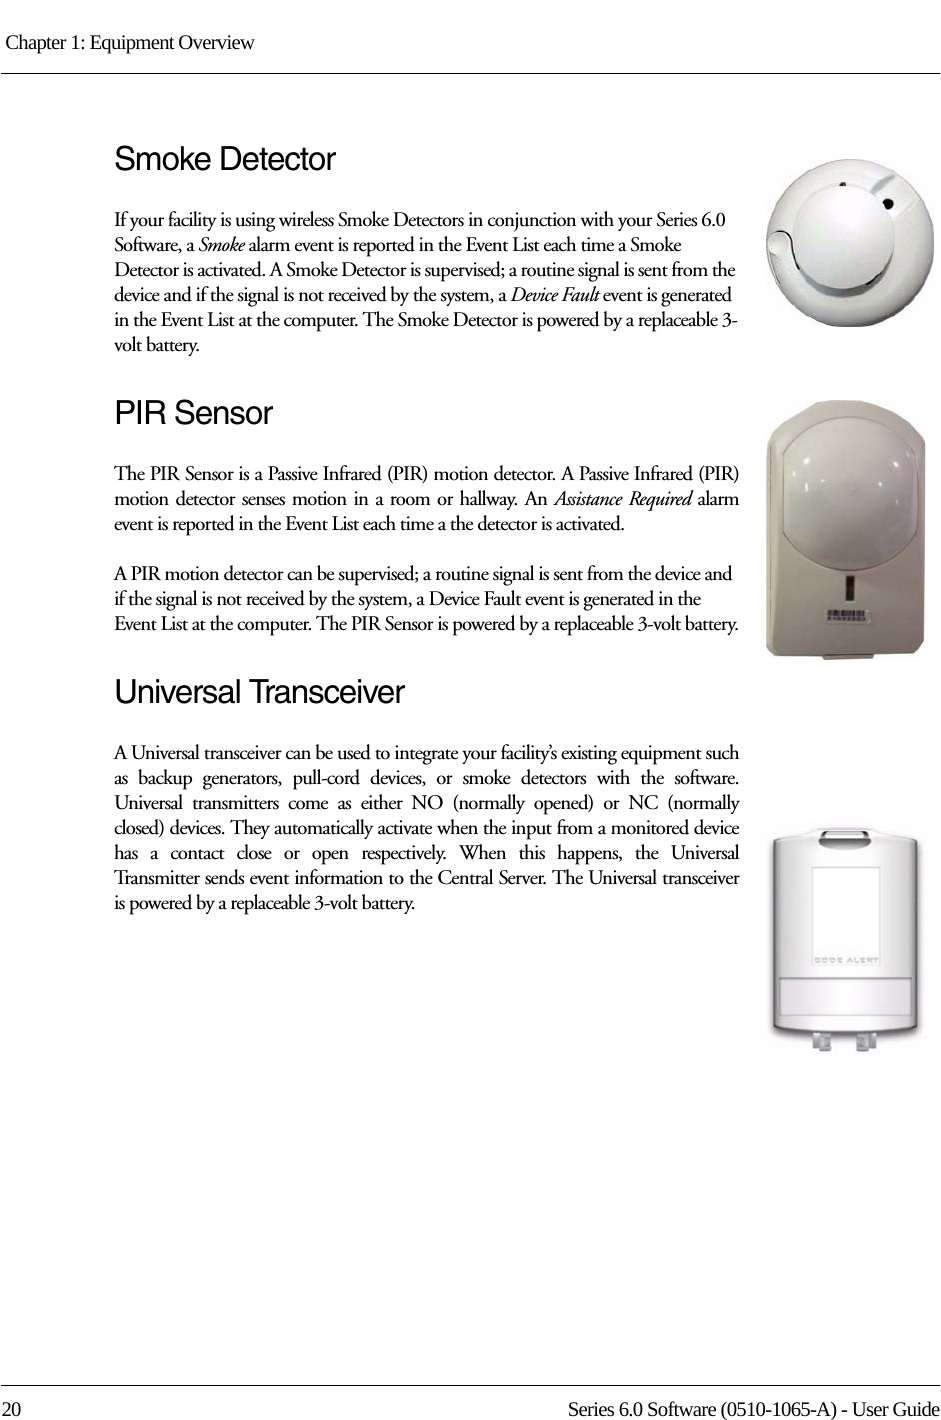 Chapter 1: Equipment Overview 20 Series 6.0 Software (0510-1065-A) - User GuideSmoke DetectorIf your facility is using wireless Smoke Detectors in conjunction with your Series 6.0 Software, a Smoke alarm event is reported in the Event List each time a Smoke Detector is activated. A Smoke Detector is supervised; a routine signal is sent from the device and if the signal is not received by the system, a Device Fault event is generated in the Event List at the computer. The Smoke Detector is powered by a replaceable 3-volt battery.PIR SensorThe PIR Sensor is a Passive Infrared (PIR) motion detector. A Passive Infrared (PIR) motion detector senses motion in a room or hallway. An Assistance Required alarm event is reported in the Event List each time a the detector is activated. A PIR motion detector can be supervised; a routine signal is sent from the device and if the signal is not received by the system, a Device Fault event is generated in the Event List at the computer. The PIR Sensor is powered by a replaceable 3-volt battery.Universal TransceiverA Universal transceiver can be used to integrate your facility’s existing equipment such as backup generators, pull-cord devices, or smoke detectors with the software. Universal transmitters come as either NO (normally opened) or NC (normally closed) devices. They automatically activate when the input from a monitored device has a contact close or open respectively. When this happens, the Universal Transmitter sends event information to the Central Server. The Universal transceiver is powered by a replaceable 3-volt battery.